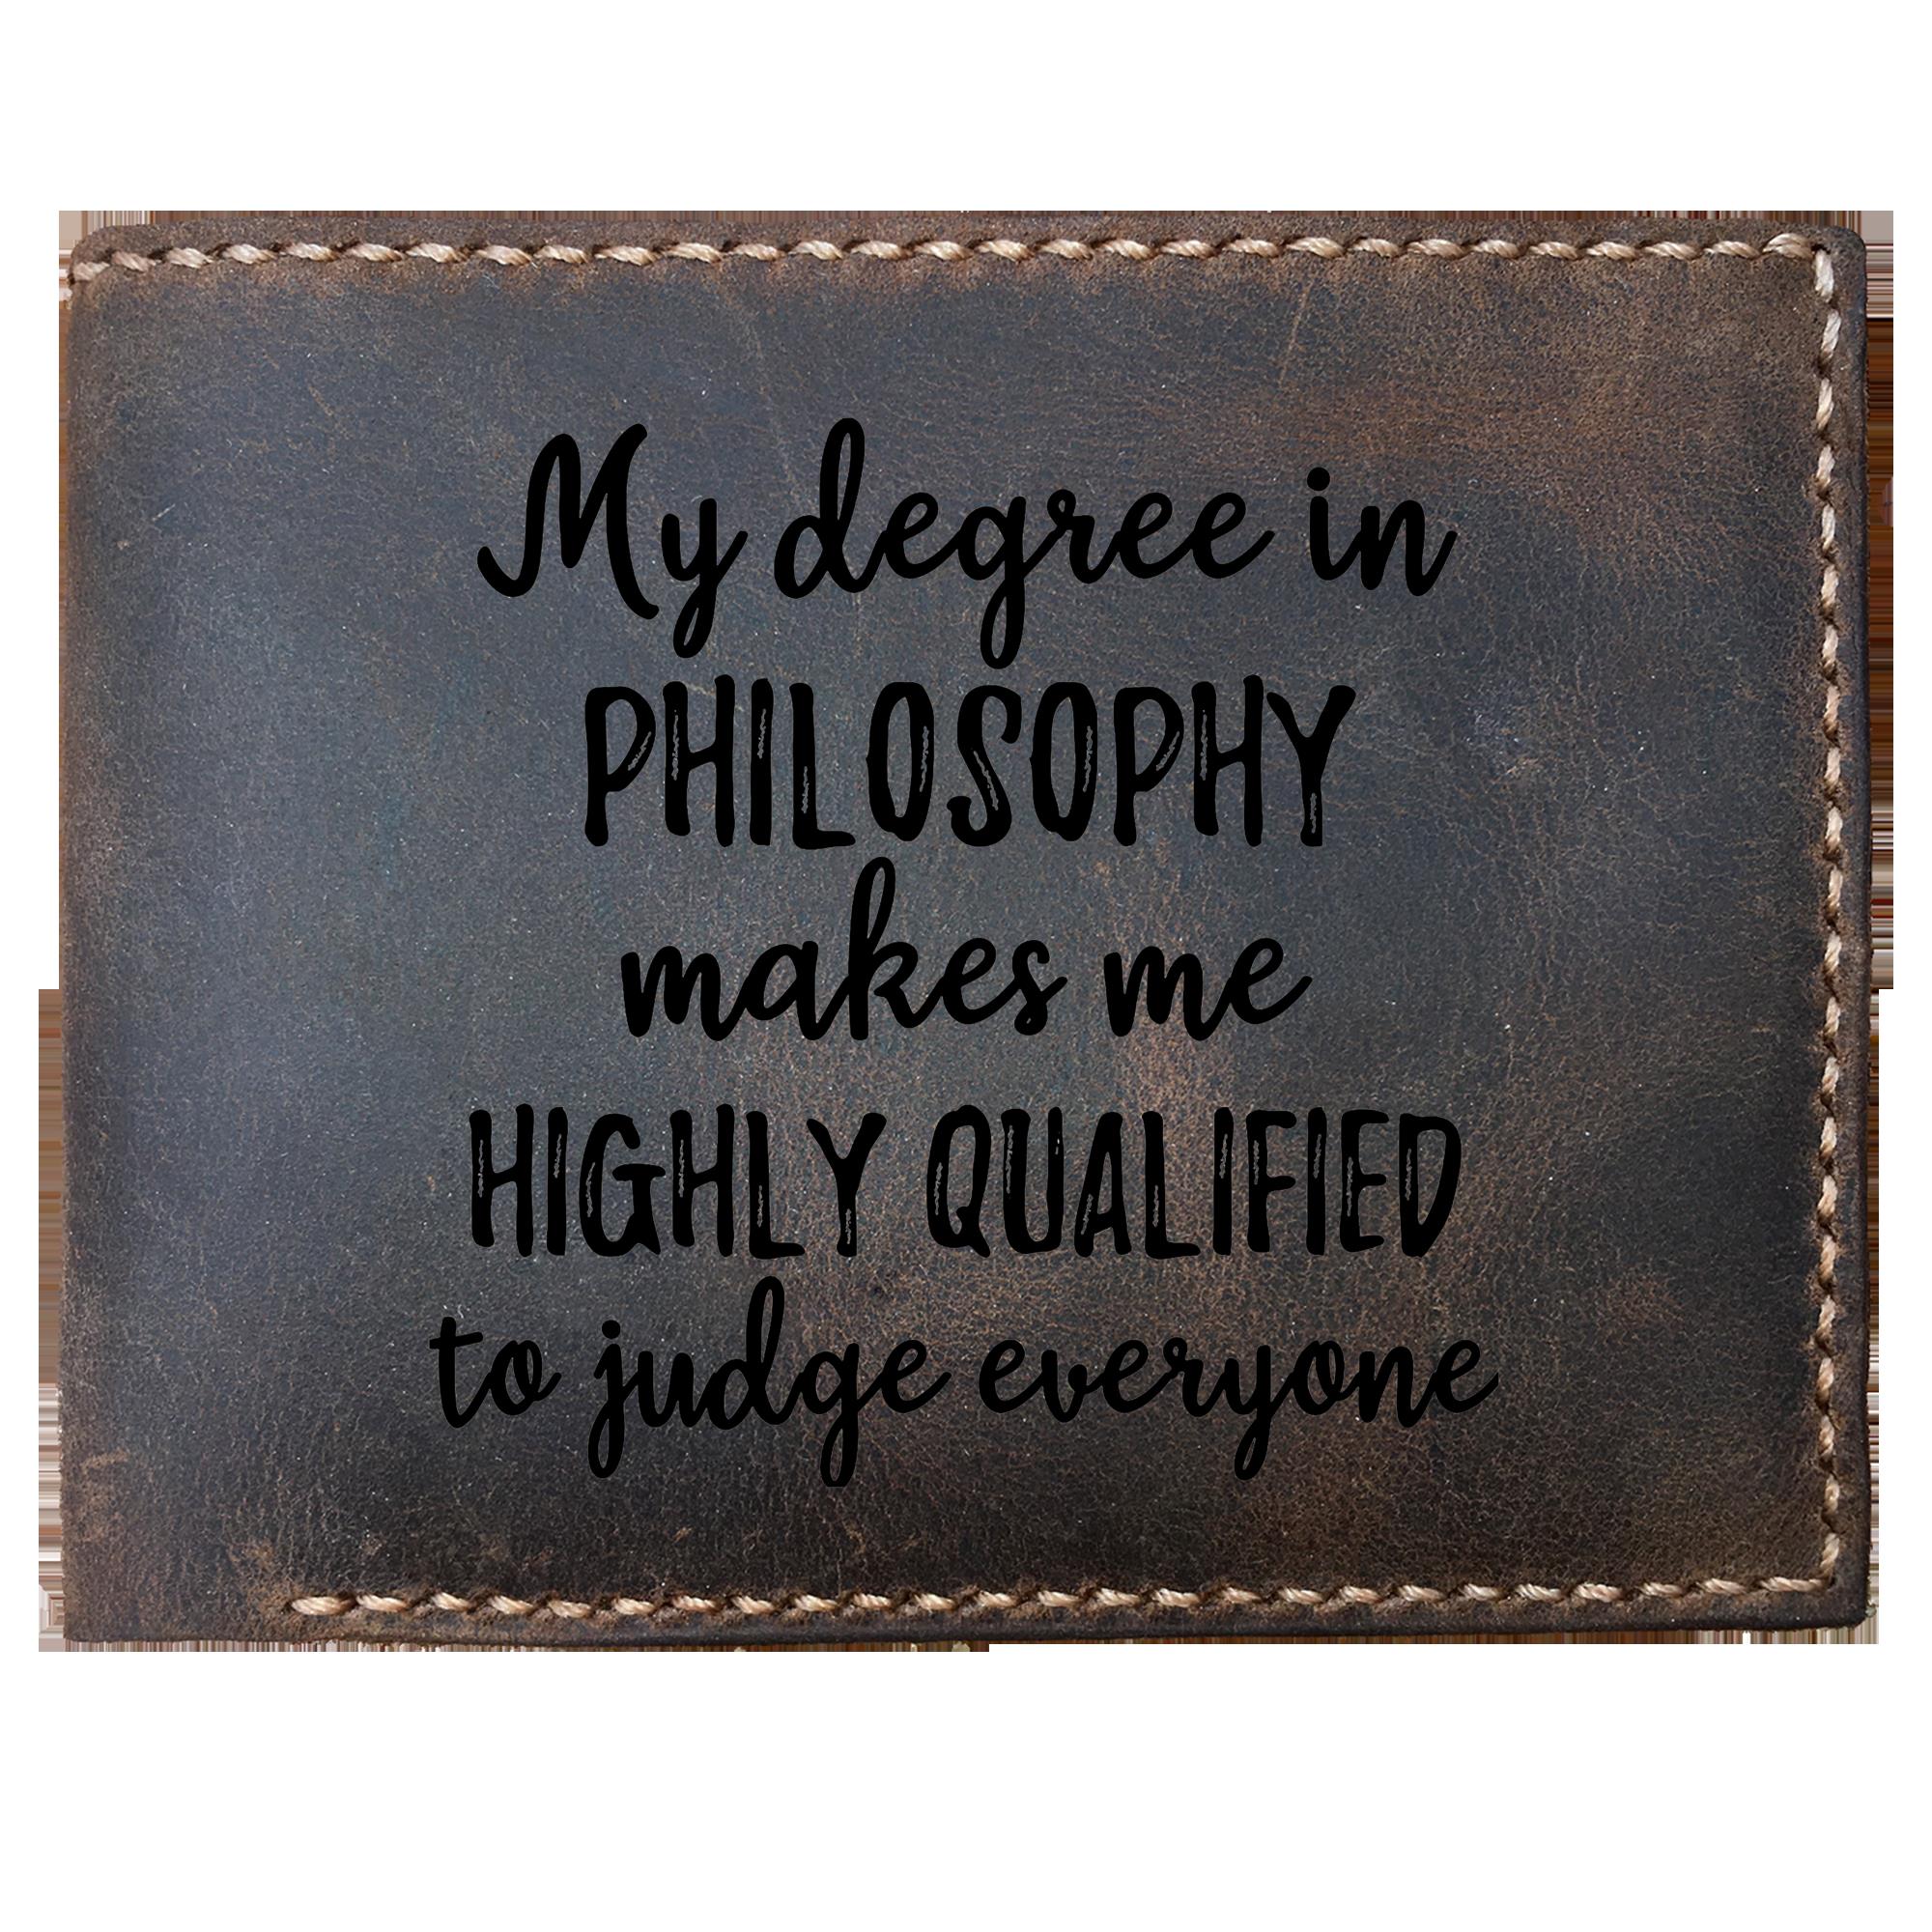 Skitongifts Funny Custom Laser Engraved Bifold Leather Wallet, My Degree In Philosophy Makes Me Highly Qualified To Judge Everyone, Graduation